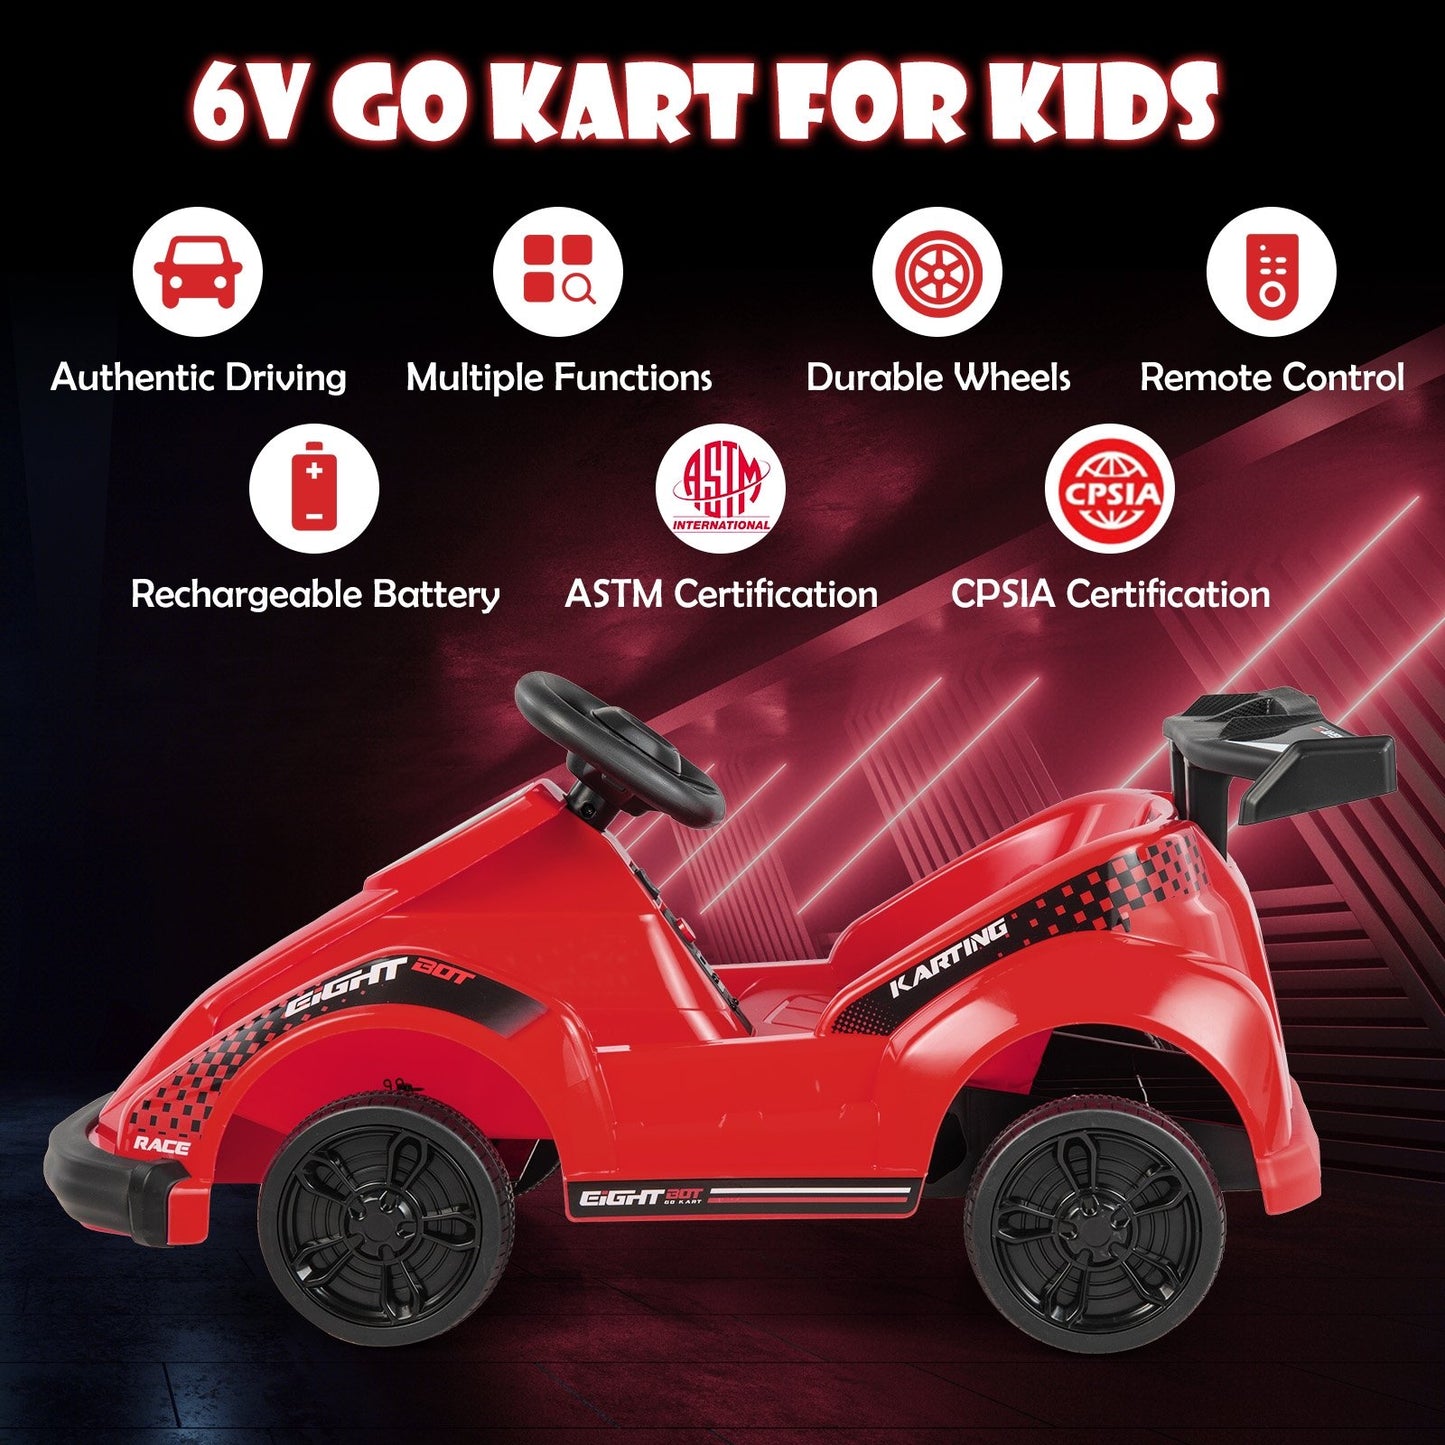 6V Kids Ride On Go Cart with Remote Control and Safety Belt, Red